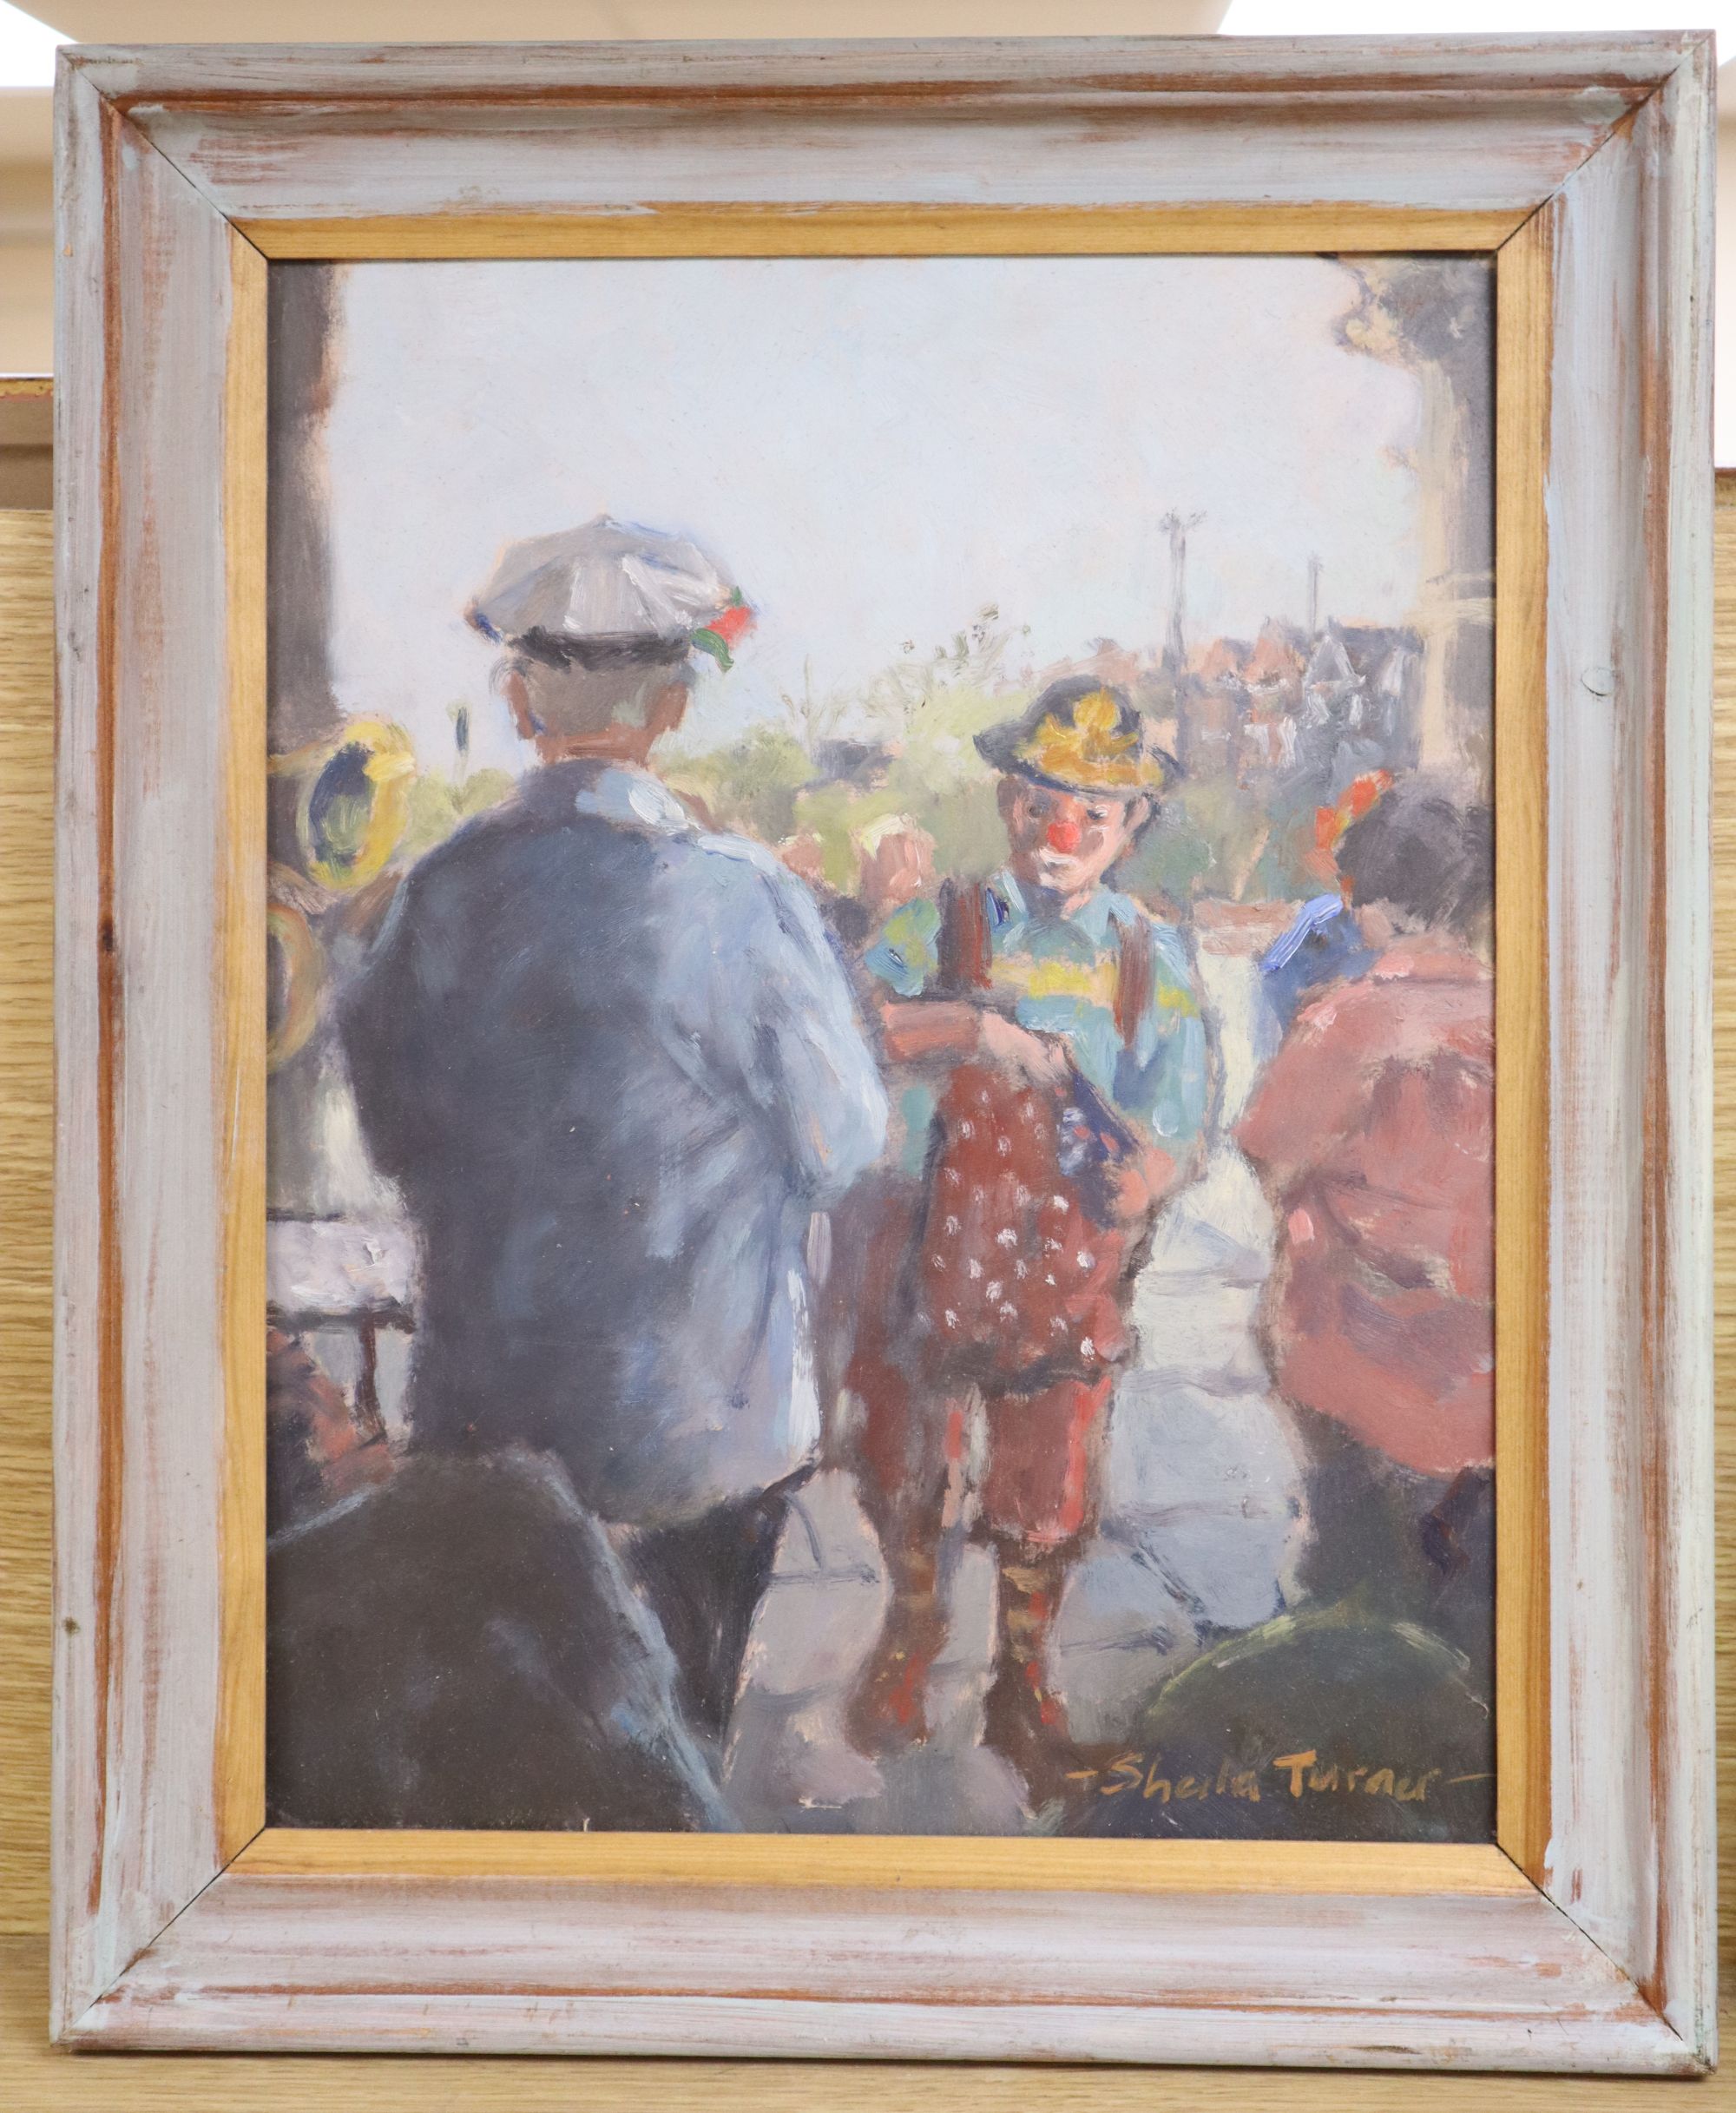 Sheila Turner (1941-), oil on board, Clown on the promenade, signed, 35 x 27cm - Image 2 of 2